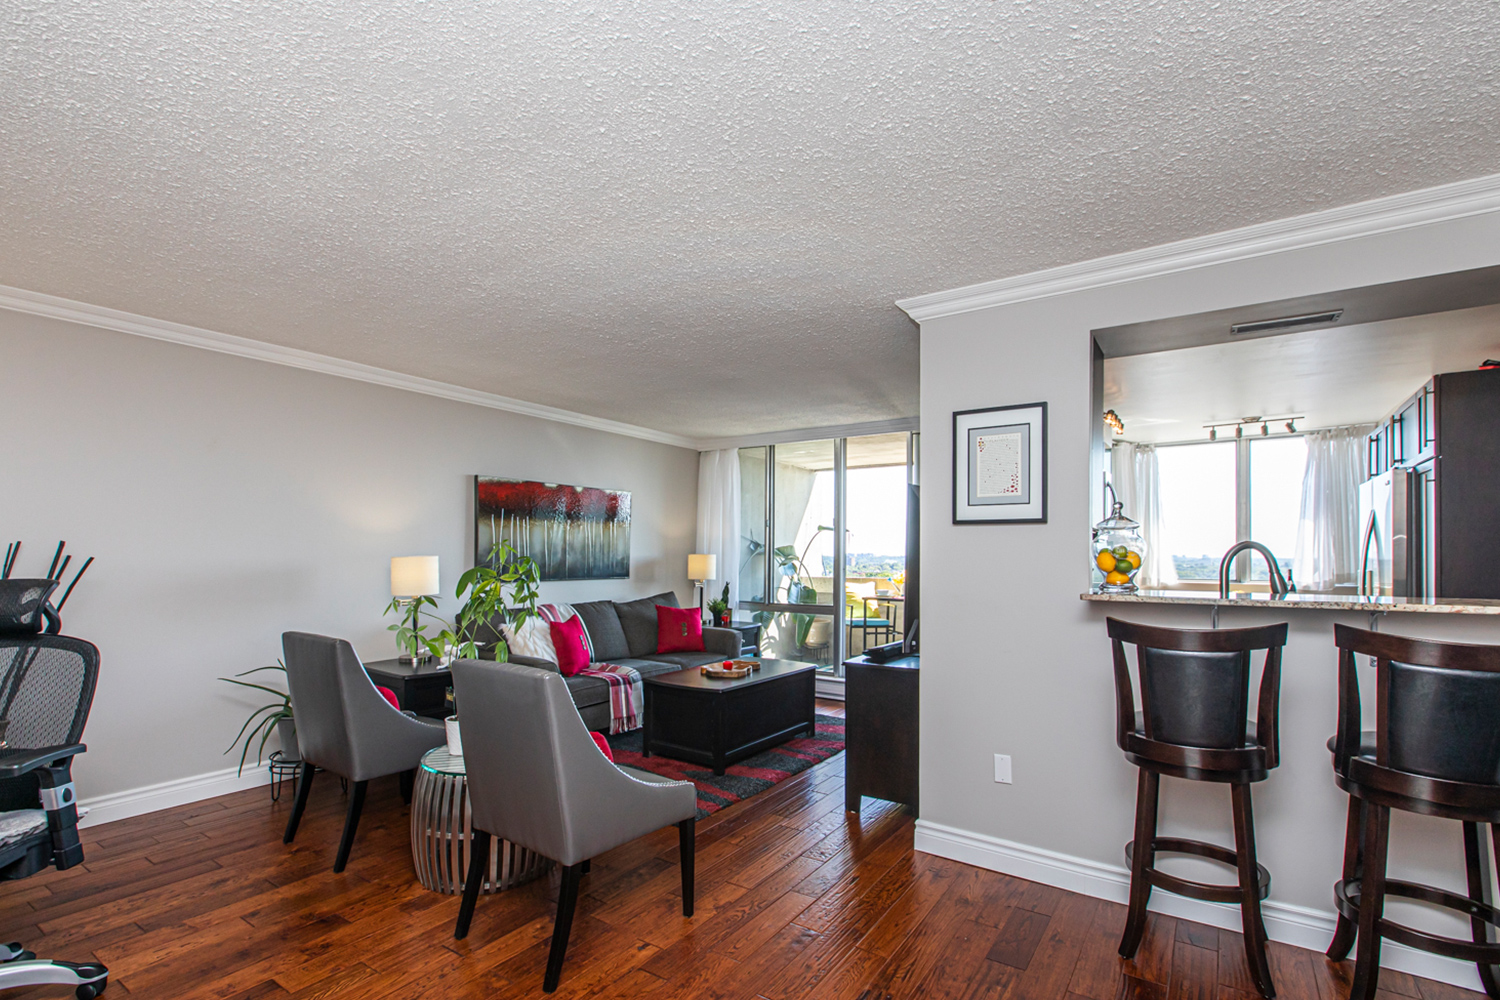 Listing__1530-530-Laurier-Ave-W__03